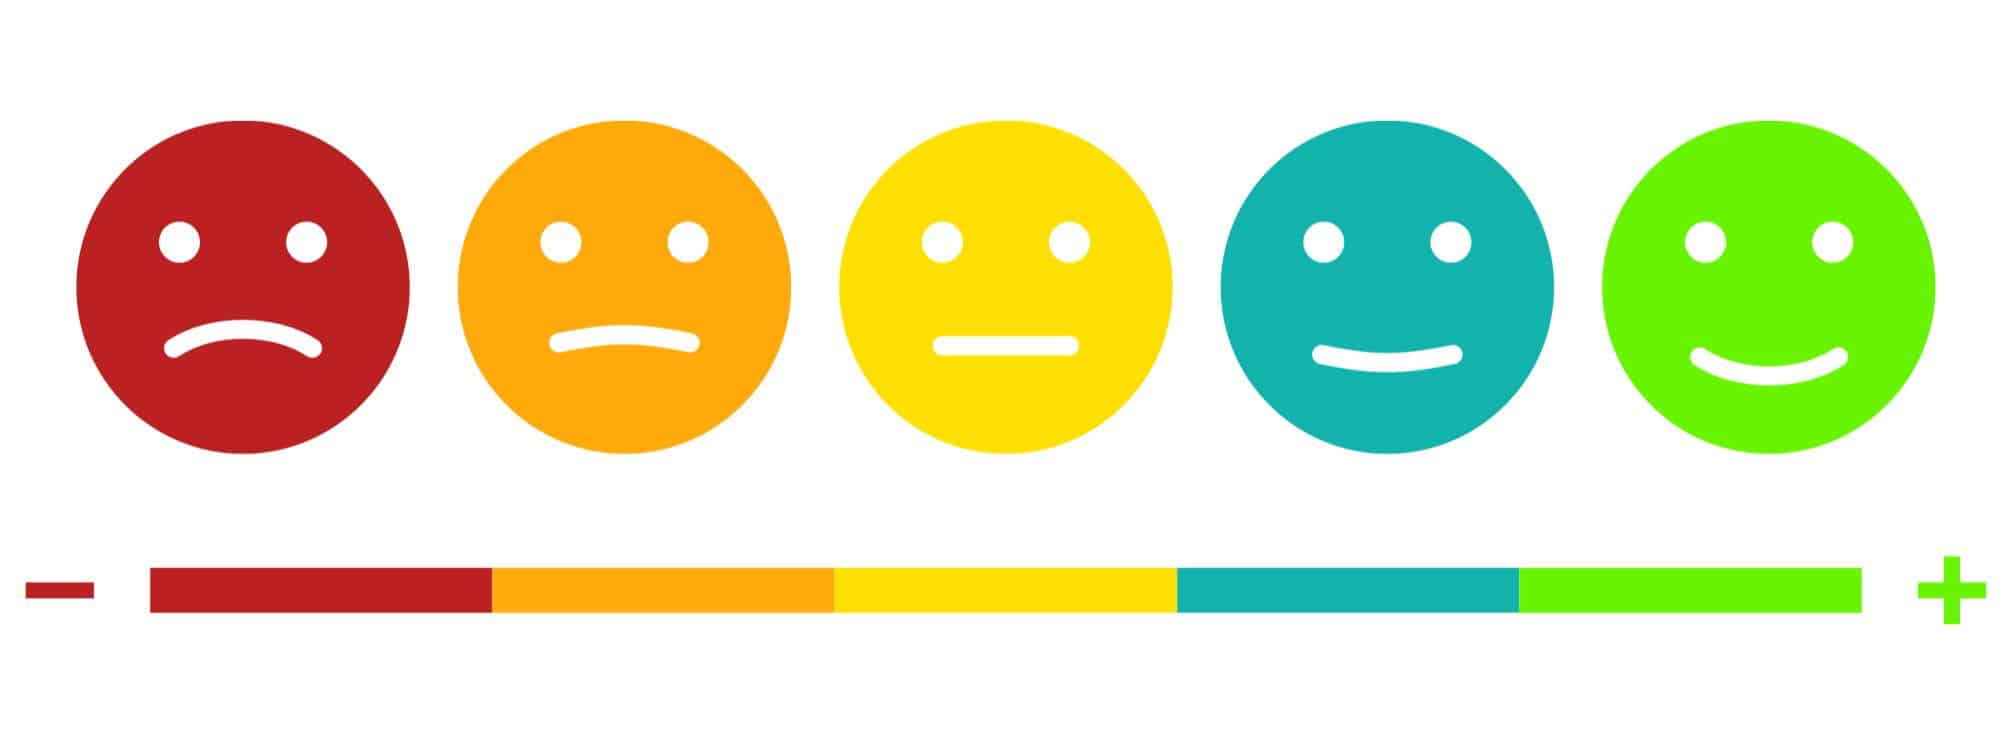 Likert scale with smiley faces going from a red frown to a green smiley face.